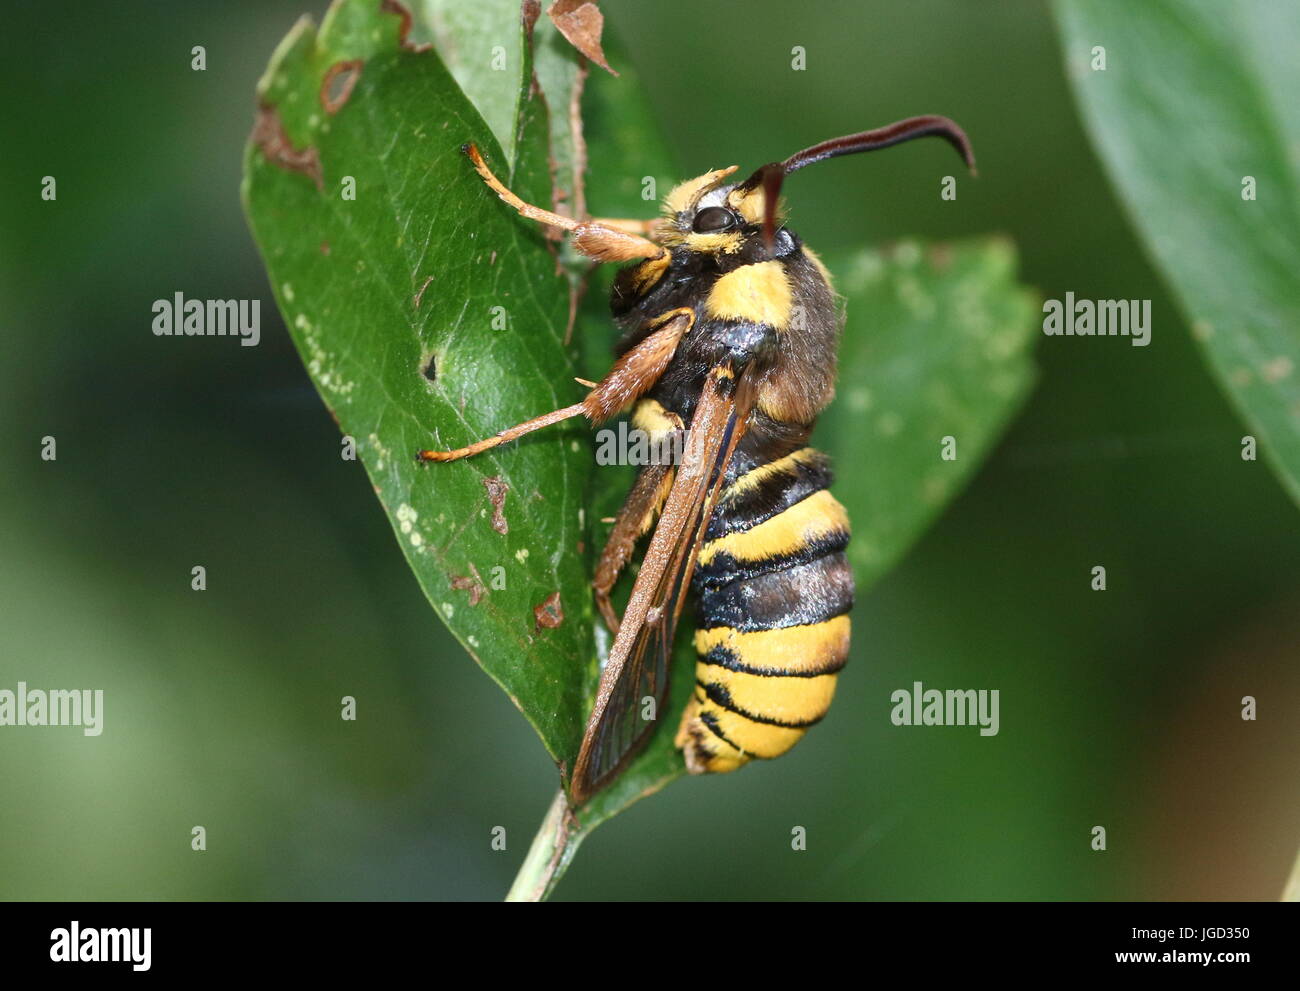 European Hornet moth or Hornet Clearwing (Sesia apiformis), a day-active moth mimicking a large bee or hornet. Stock Photo